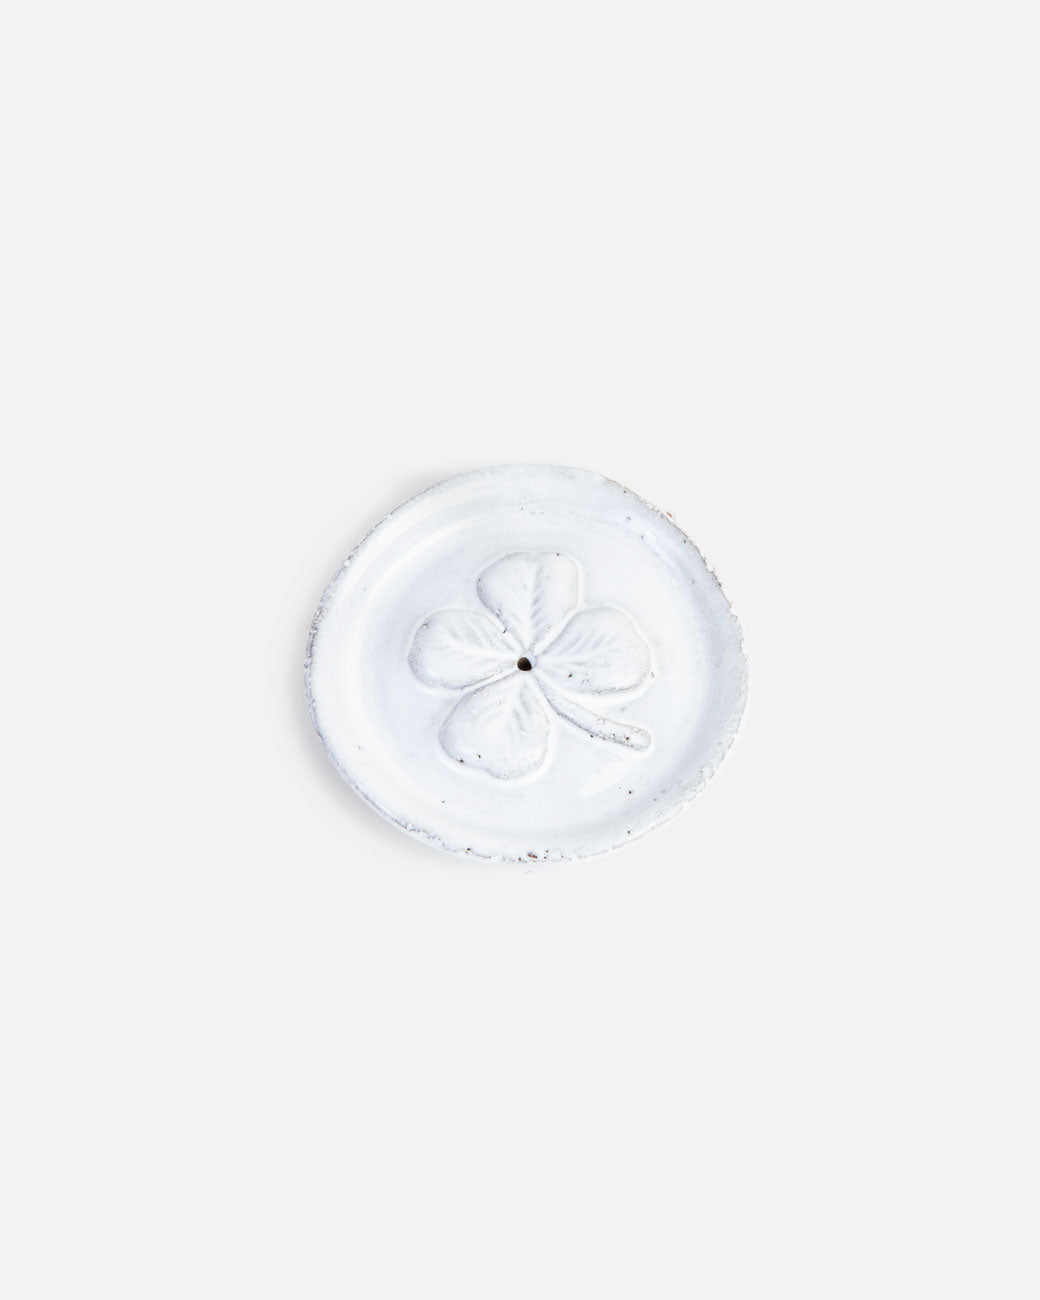 round white incense burner with a four leaf clover pattern on the face